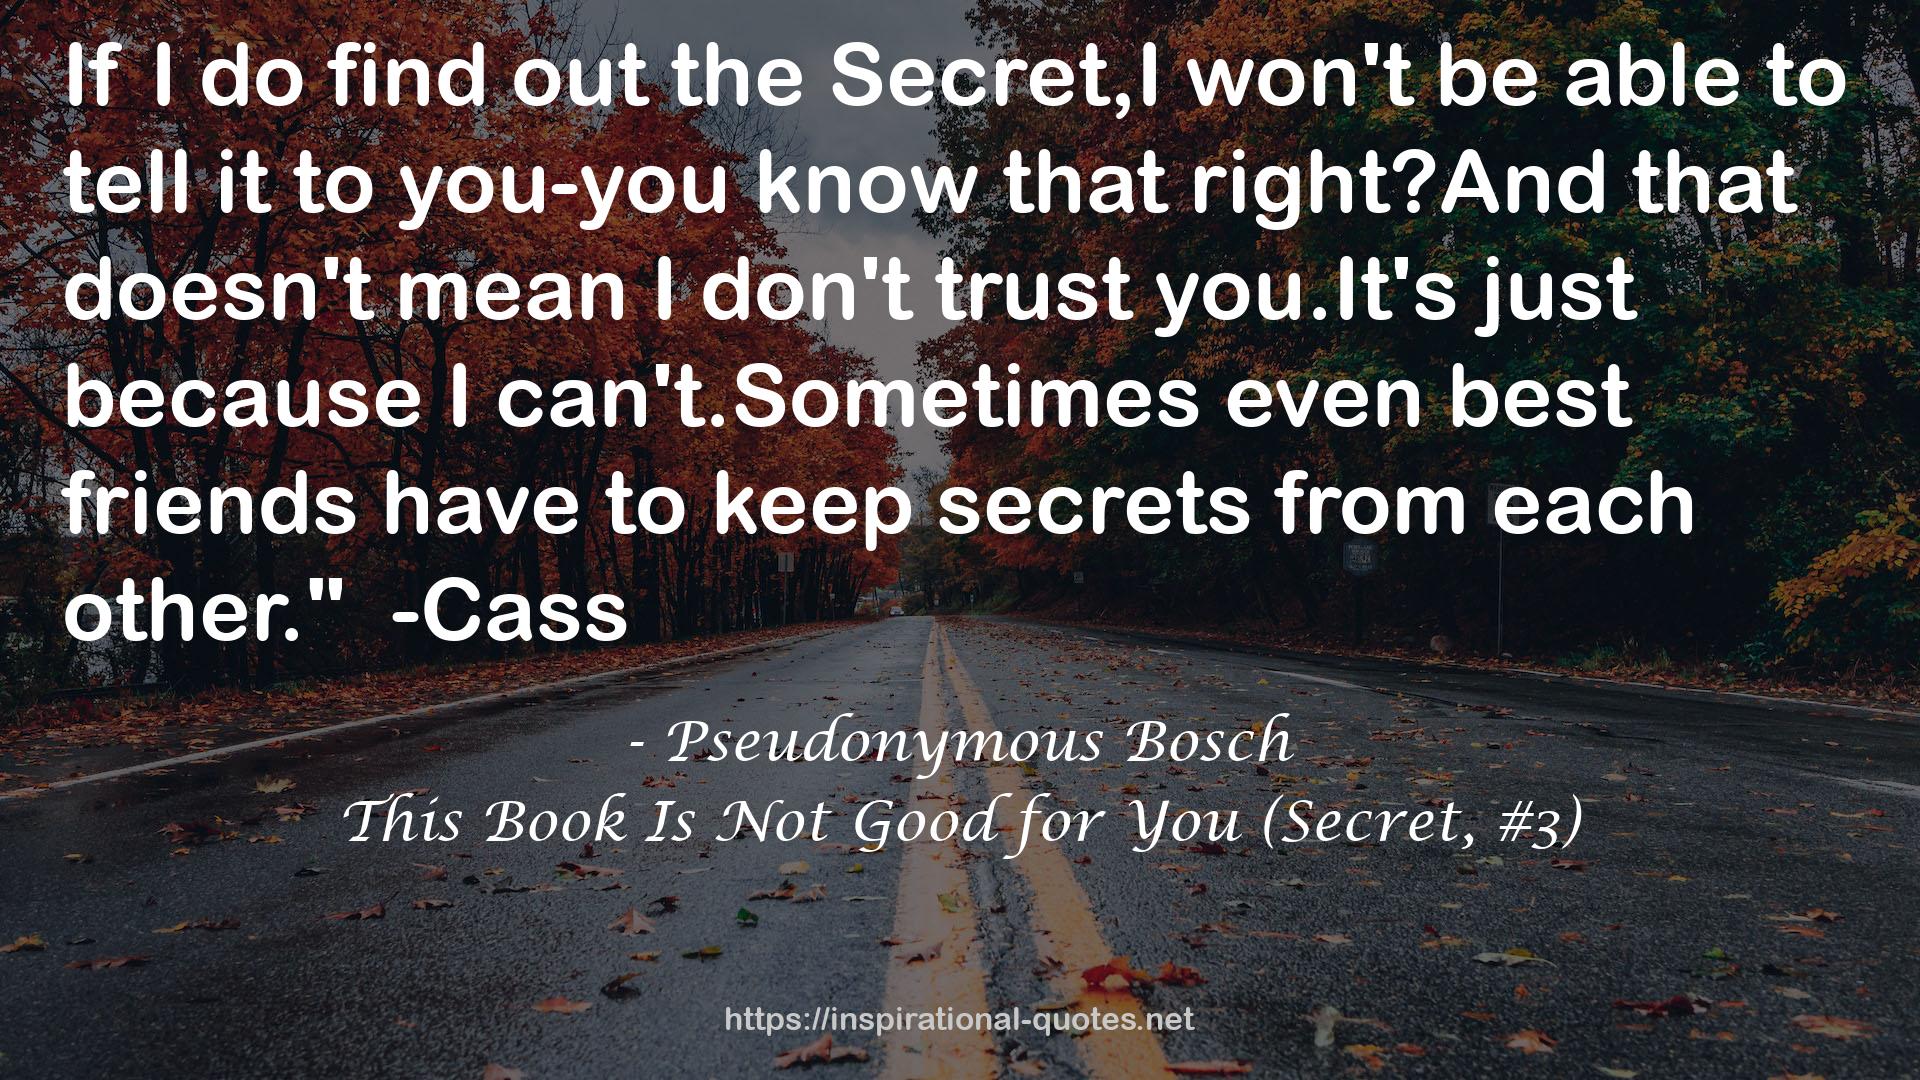 This Book Is Not Good for You (Secret, #3) QUOTES